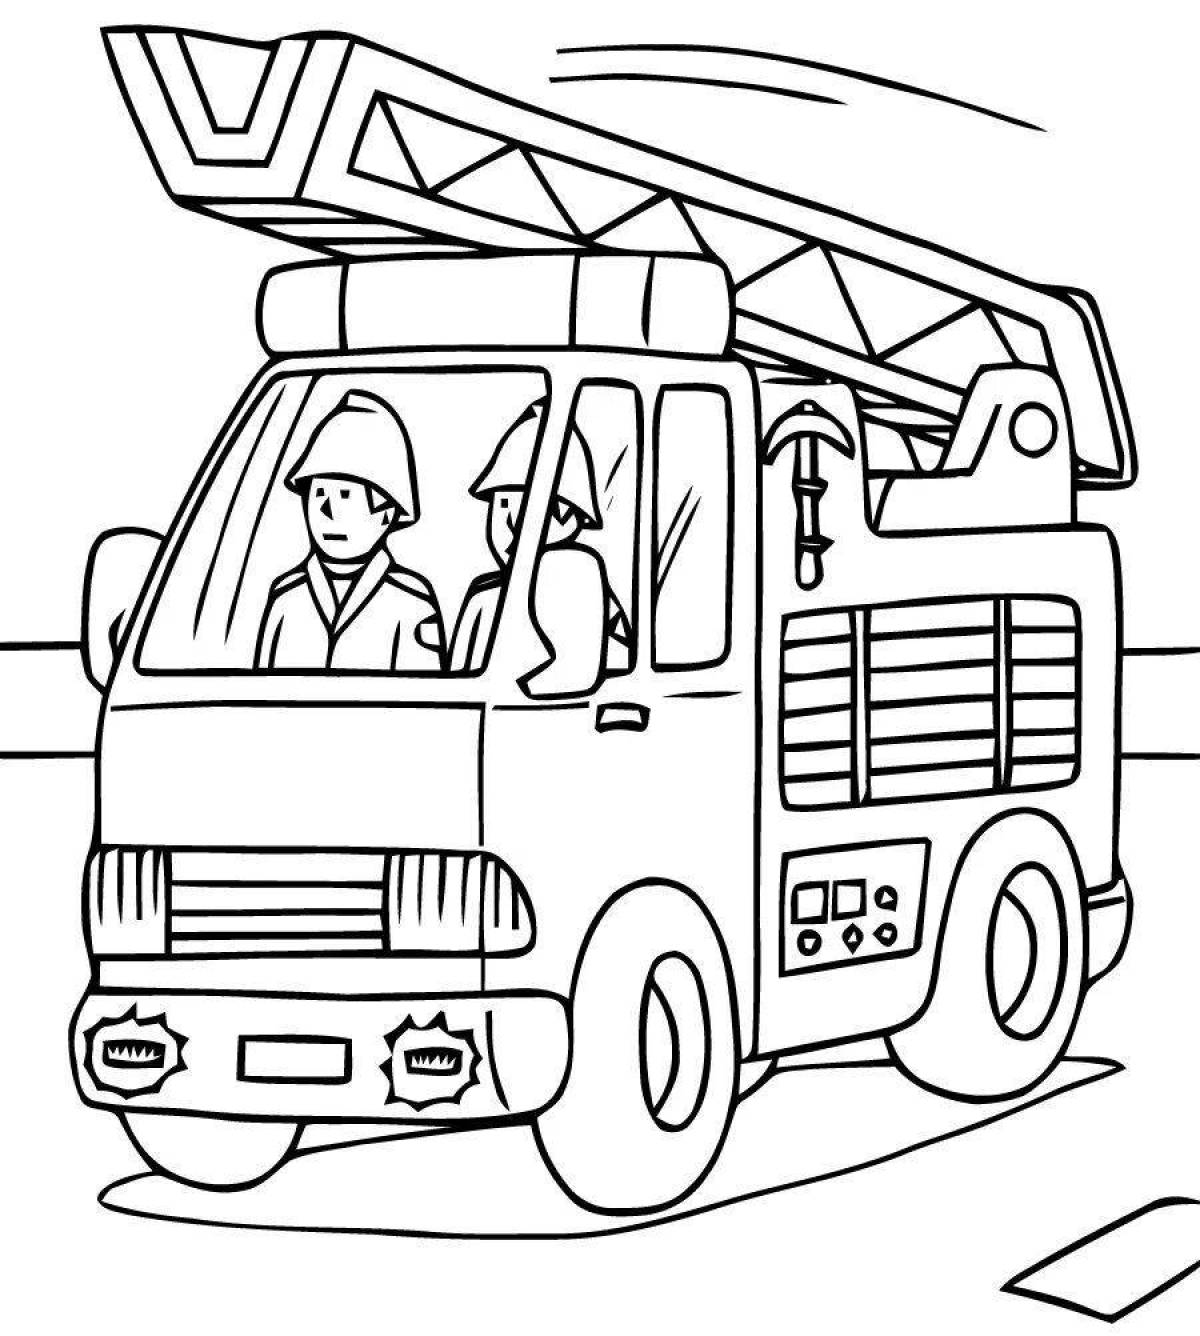 Creative coloring professions in transport